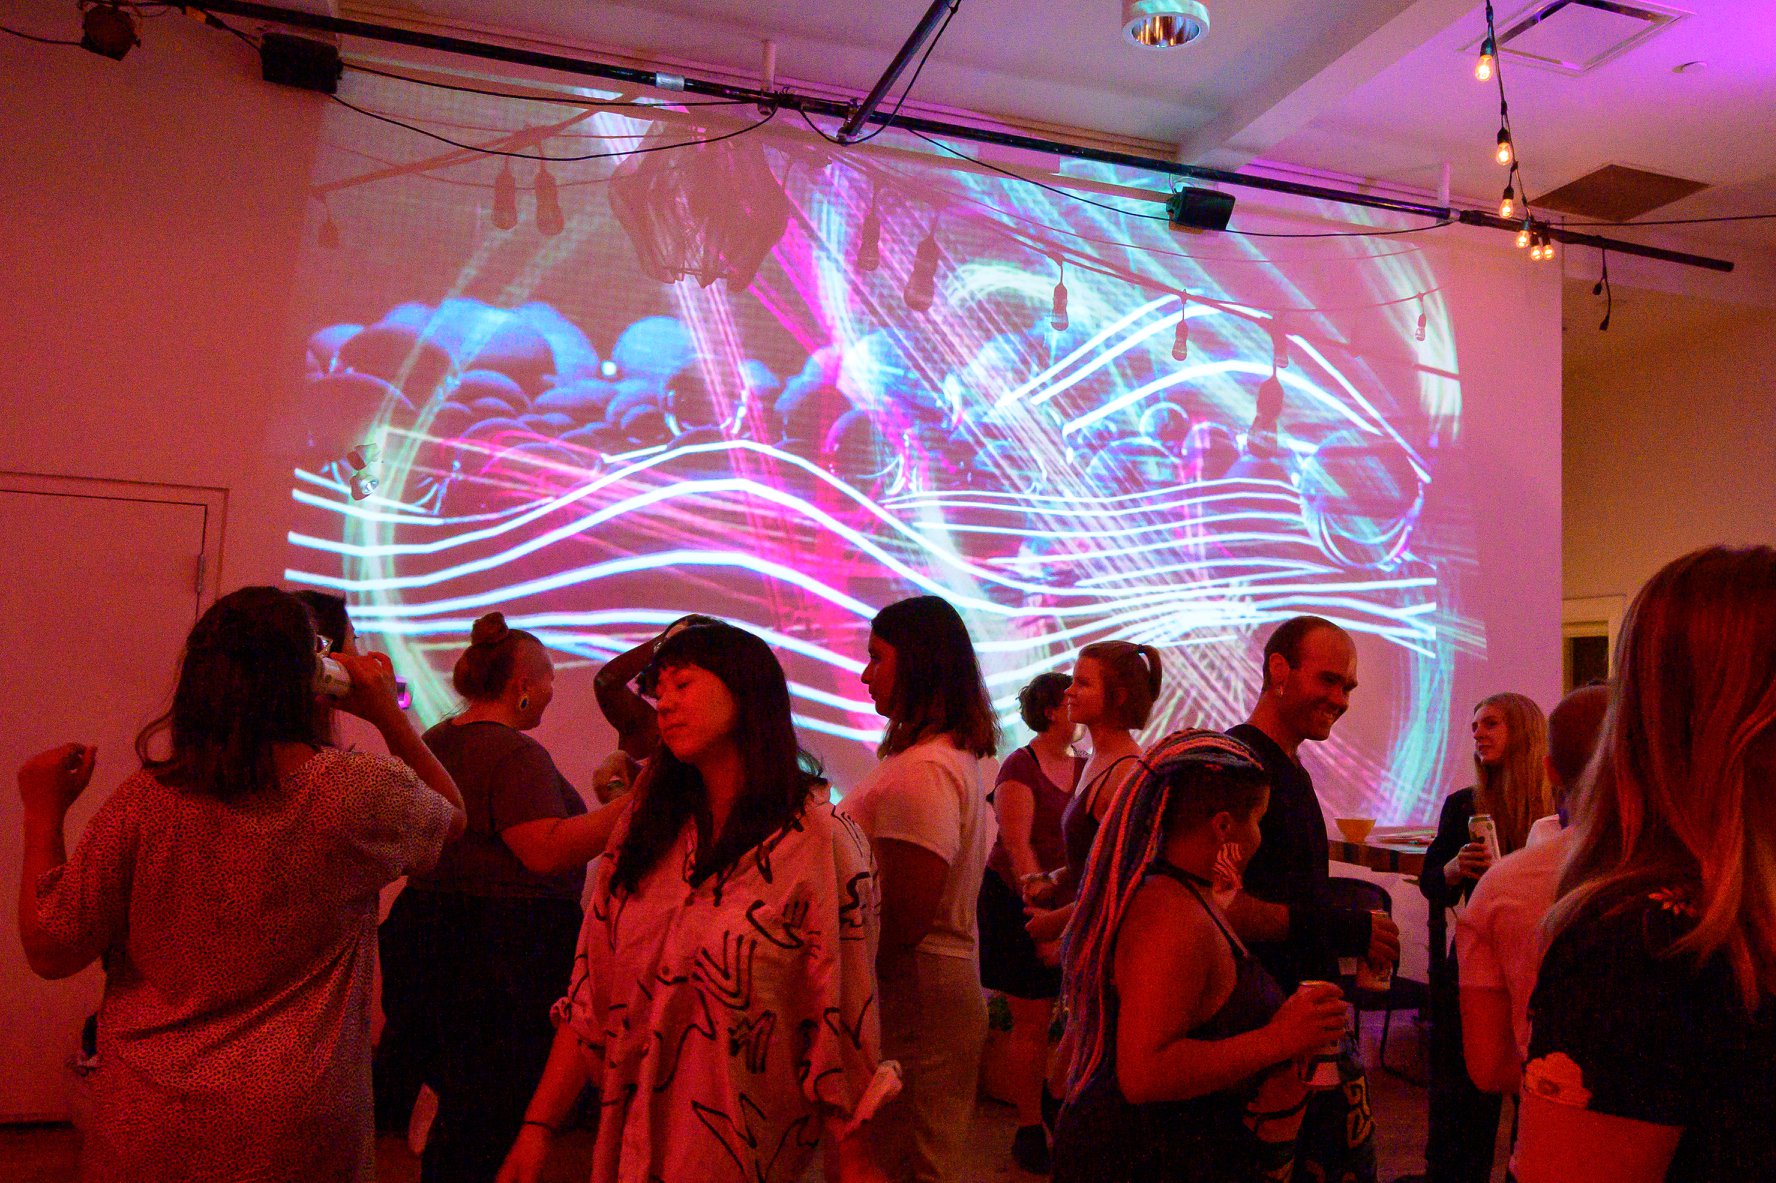 Purple and blue wavy projections on a white background, indoors, with a crowd of people dancing, talking and eating in the foreground.